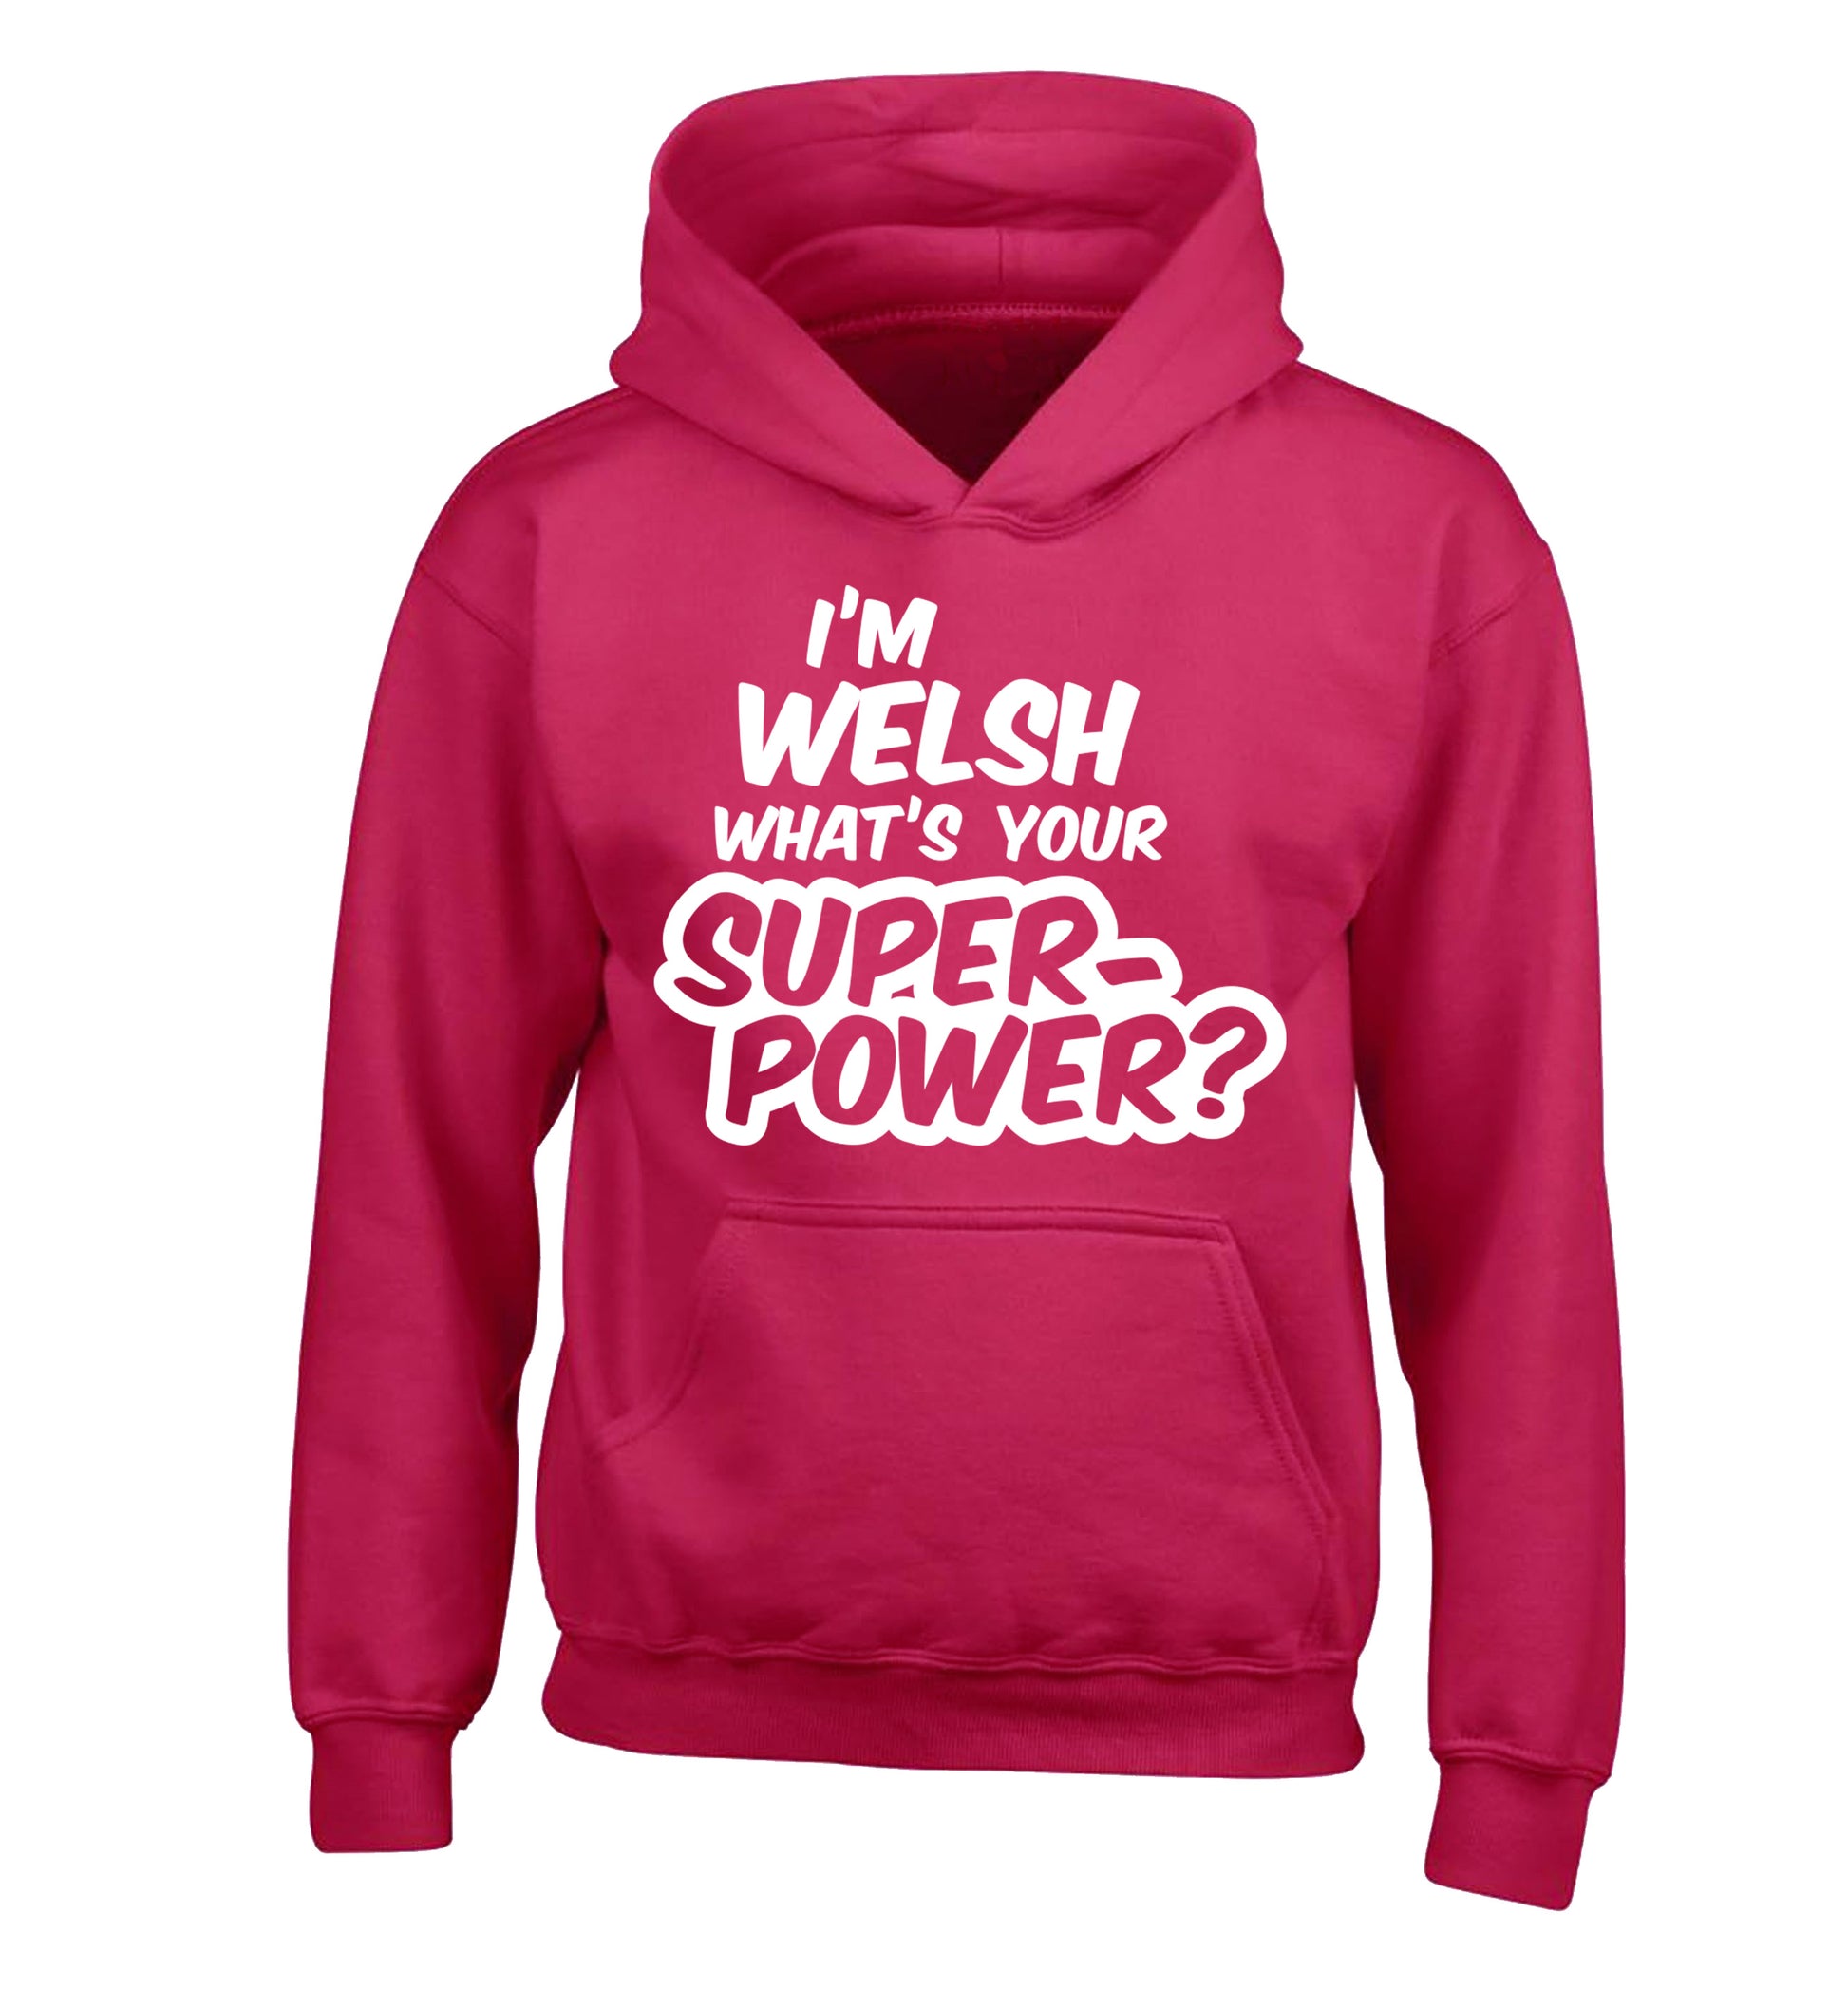 I'm Welsh what's your superpower? children's pink hoodie 12-13 Years